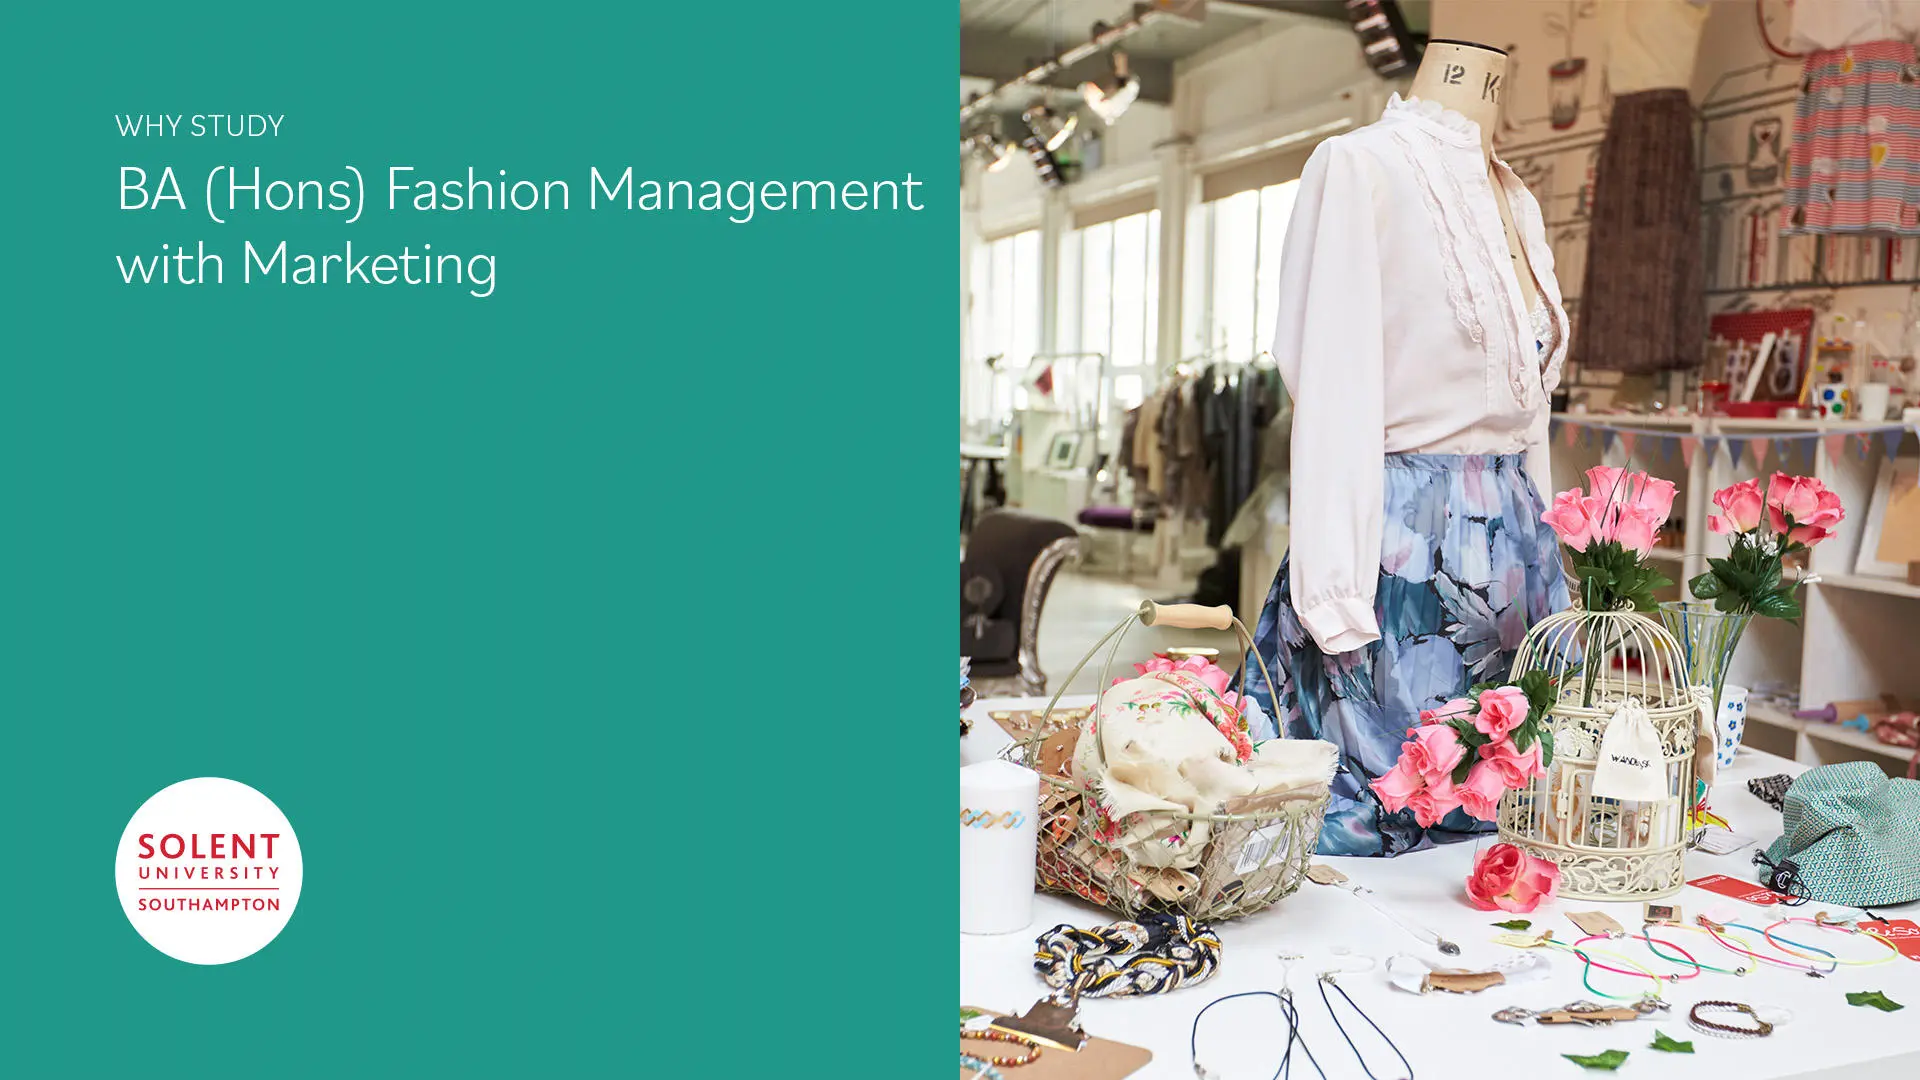 Image reads Why study BA (Hons) Fashion Management with Marketing